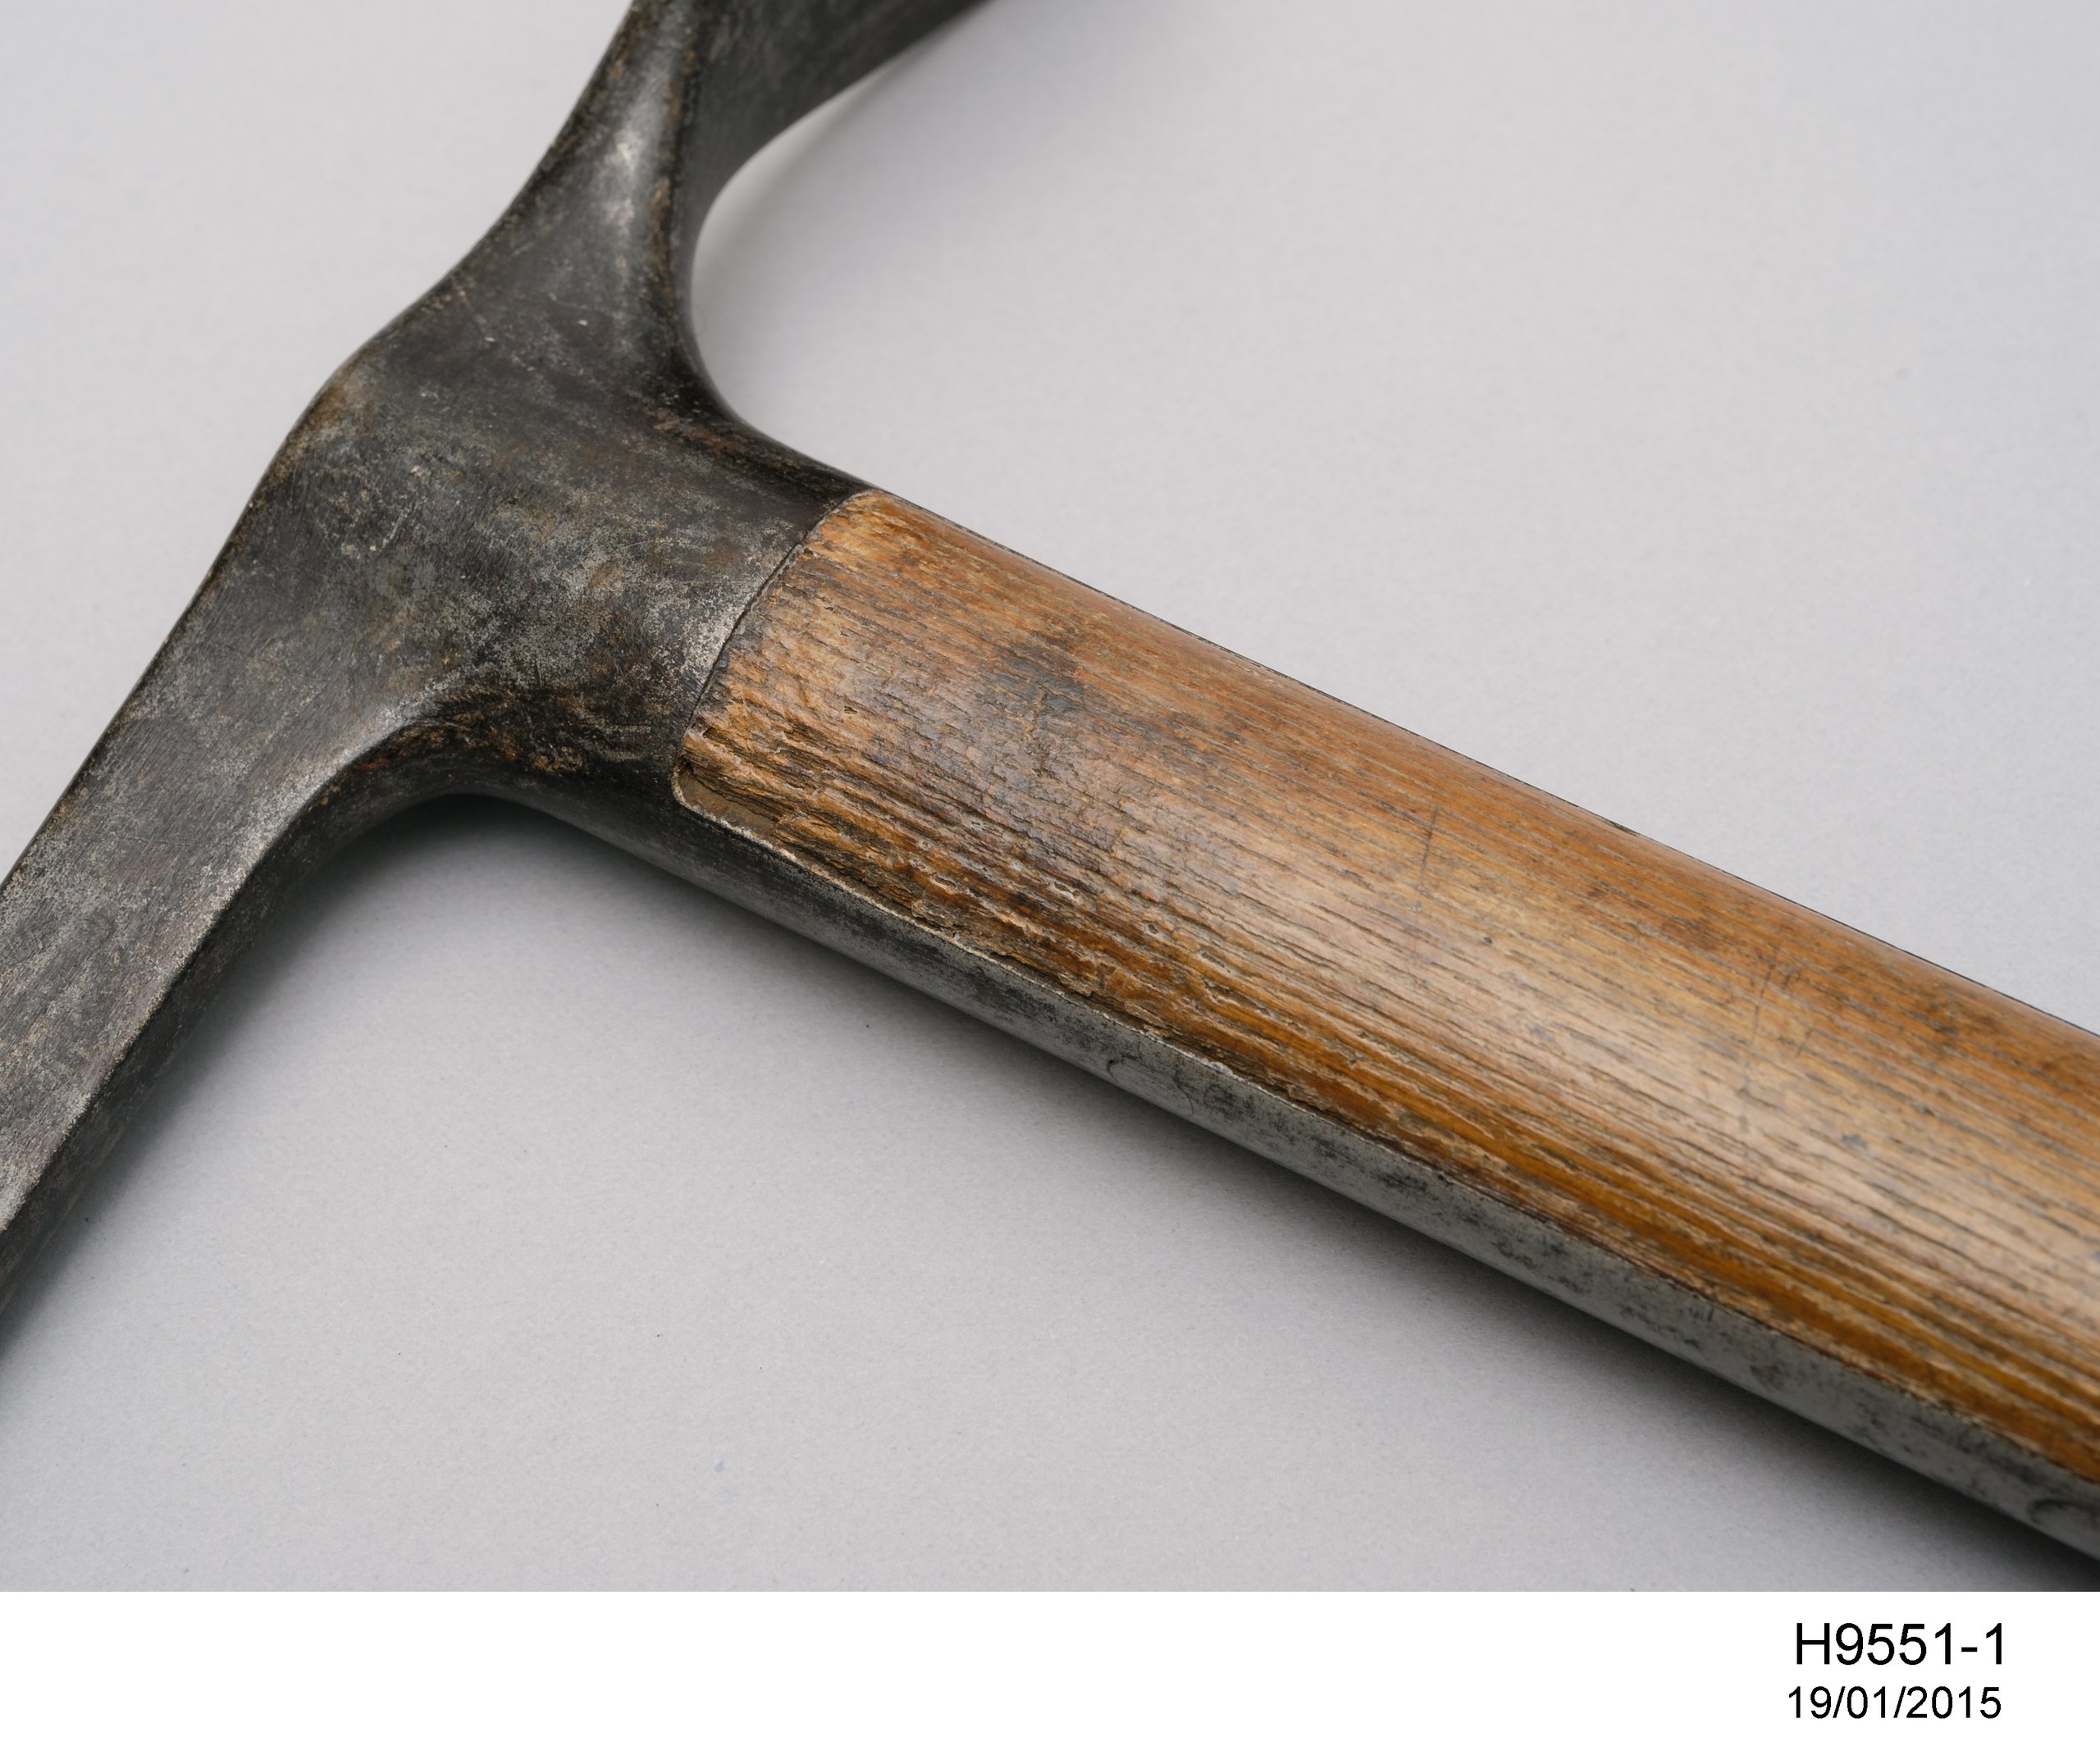 Ice axe used during the Sir Douglas Mawson's Australasian Antarctic Expedition